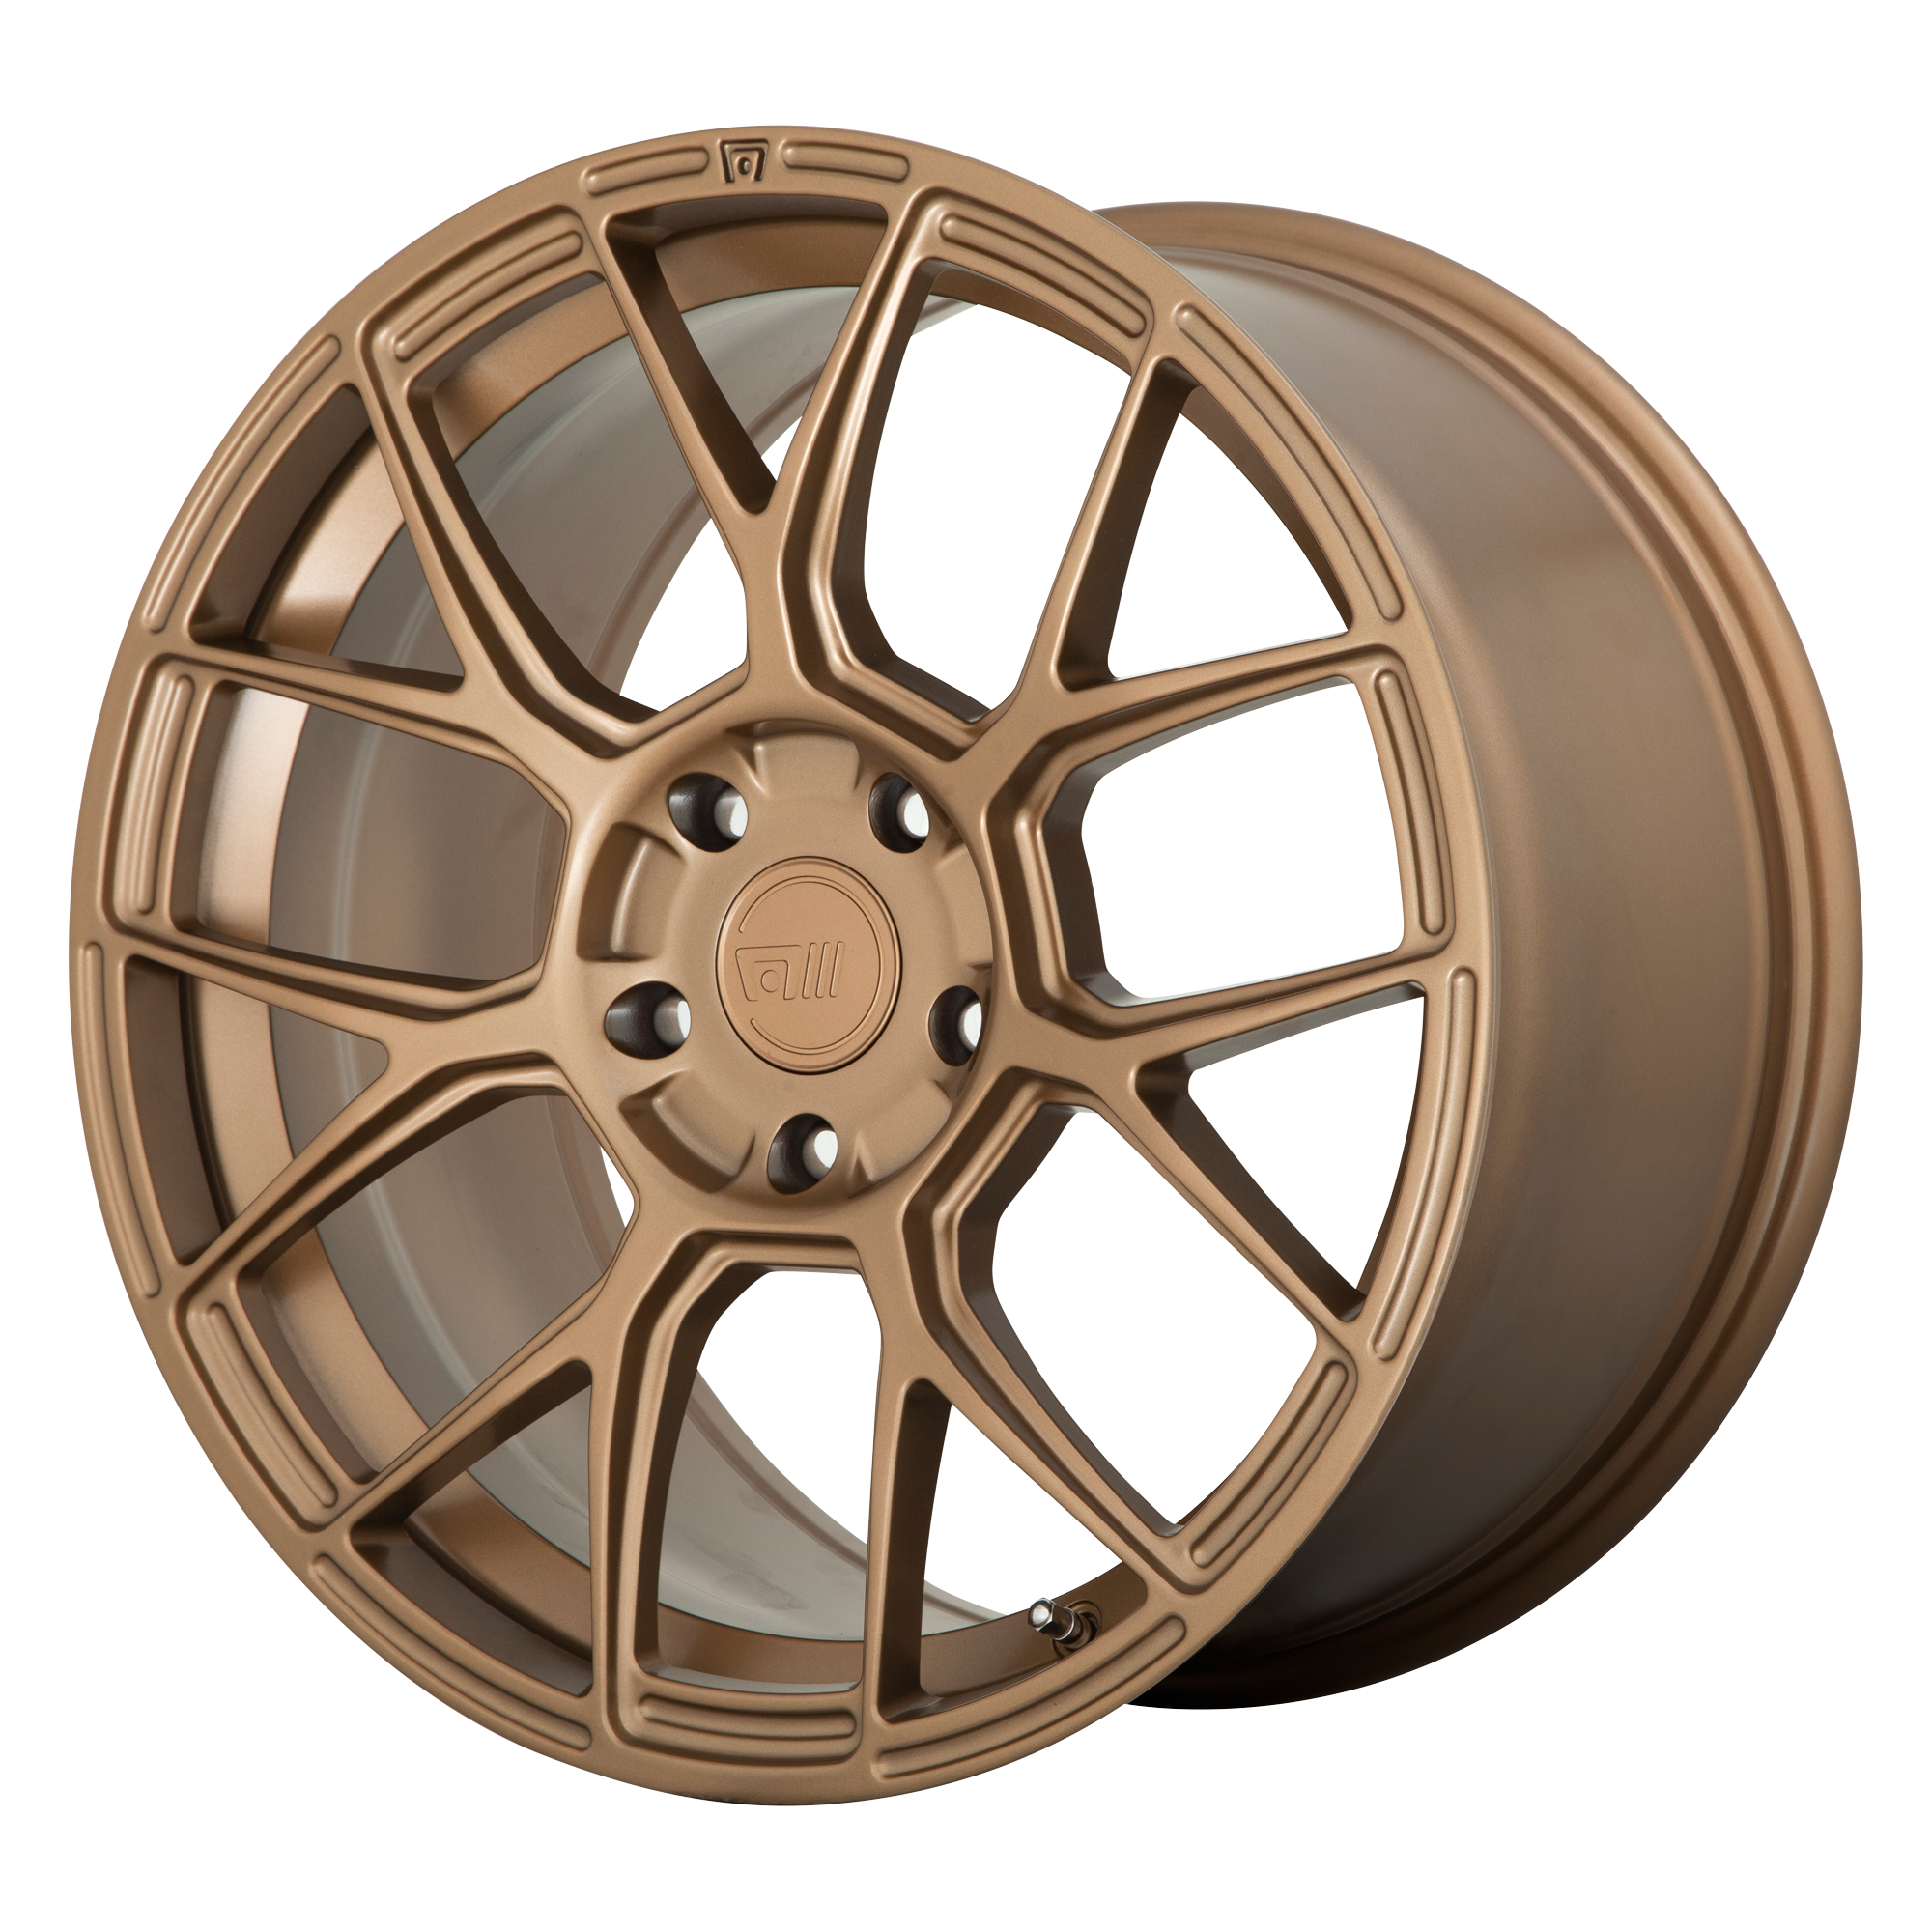 CM7 17x8 5x120.00 MATTE BRONZE (38 mm) - Tires and Engine Performance